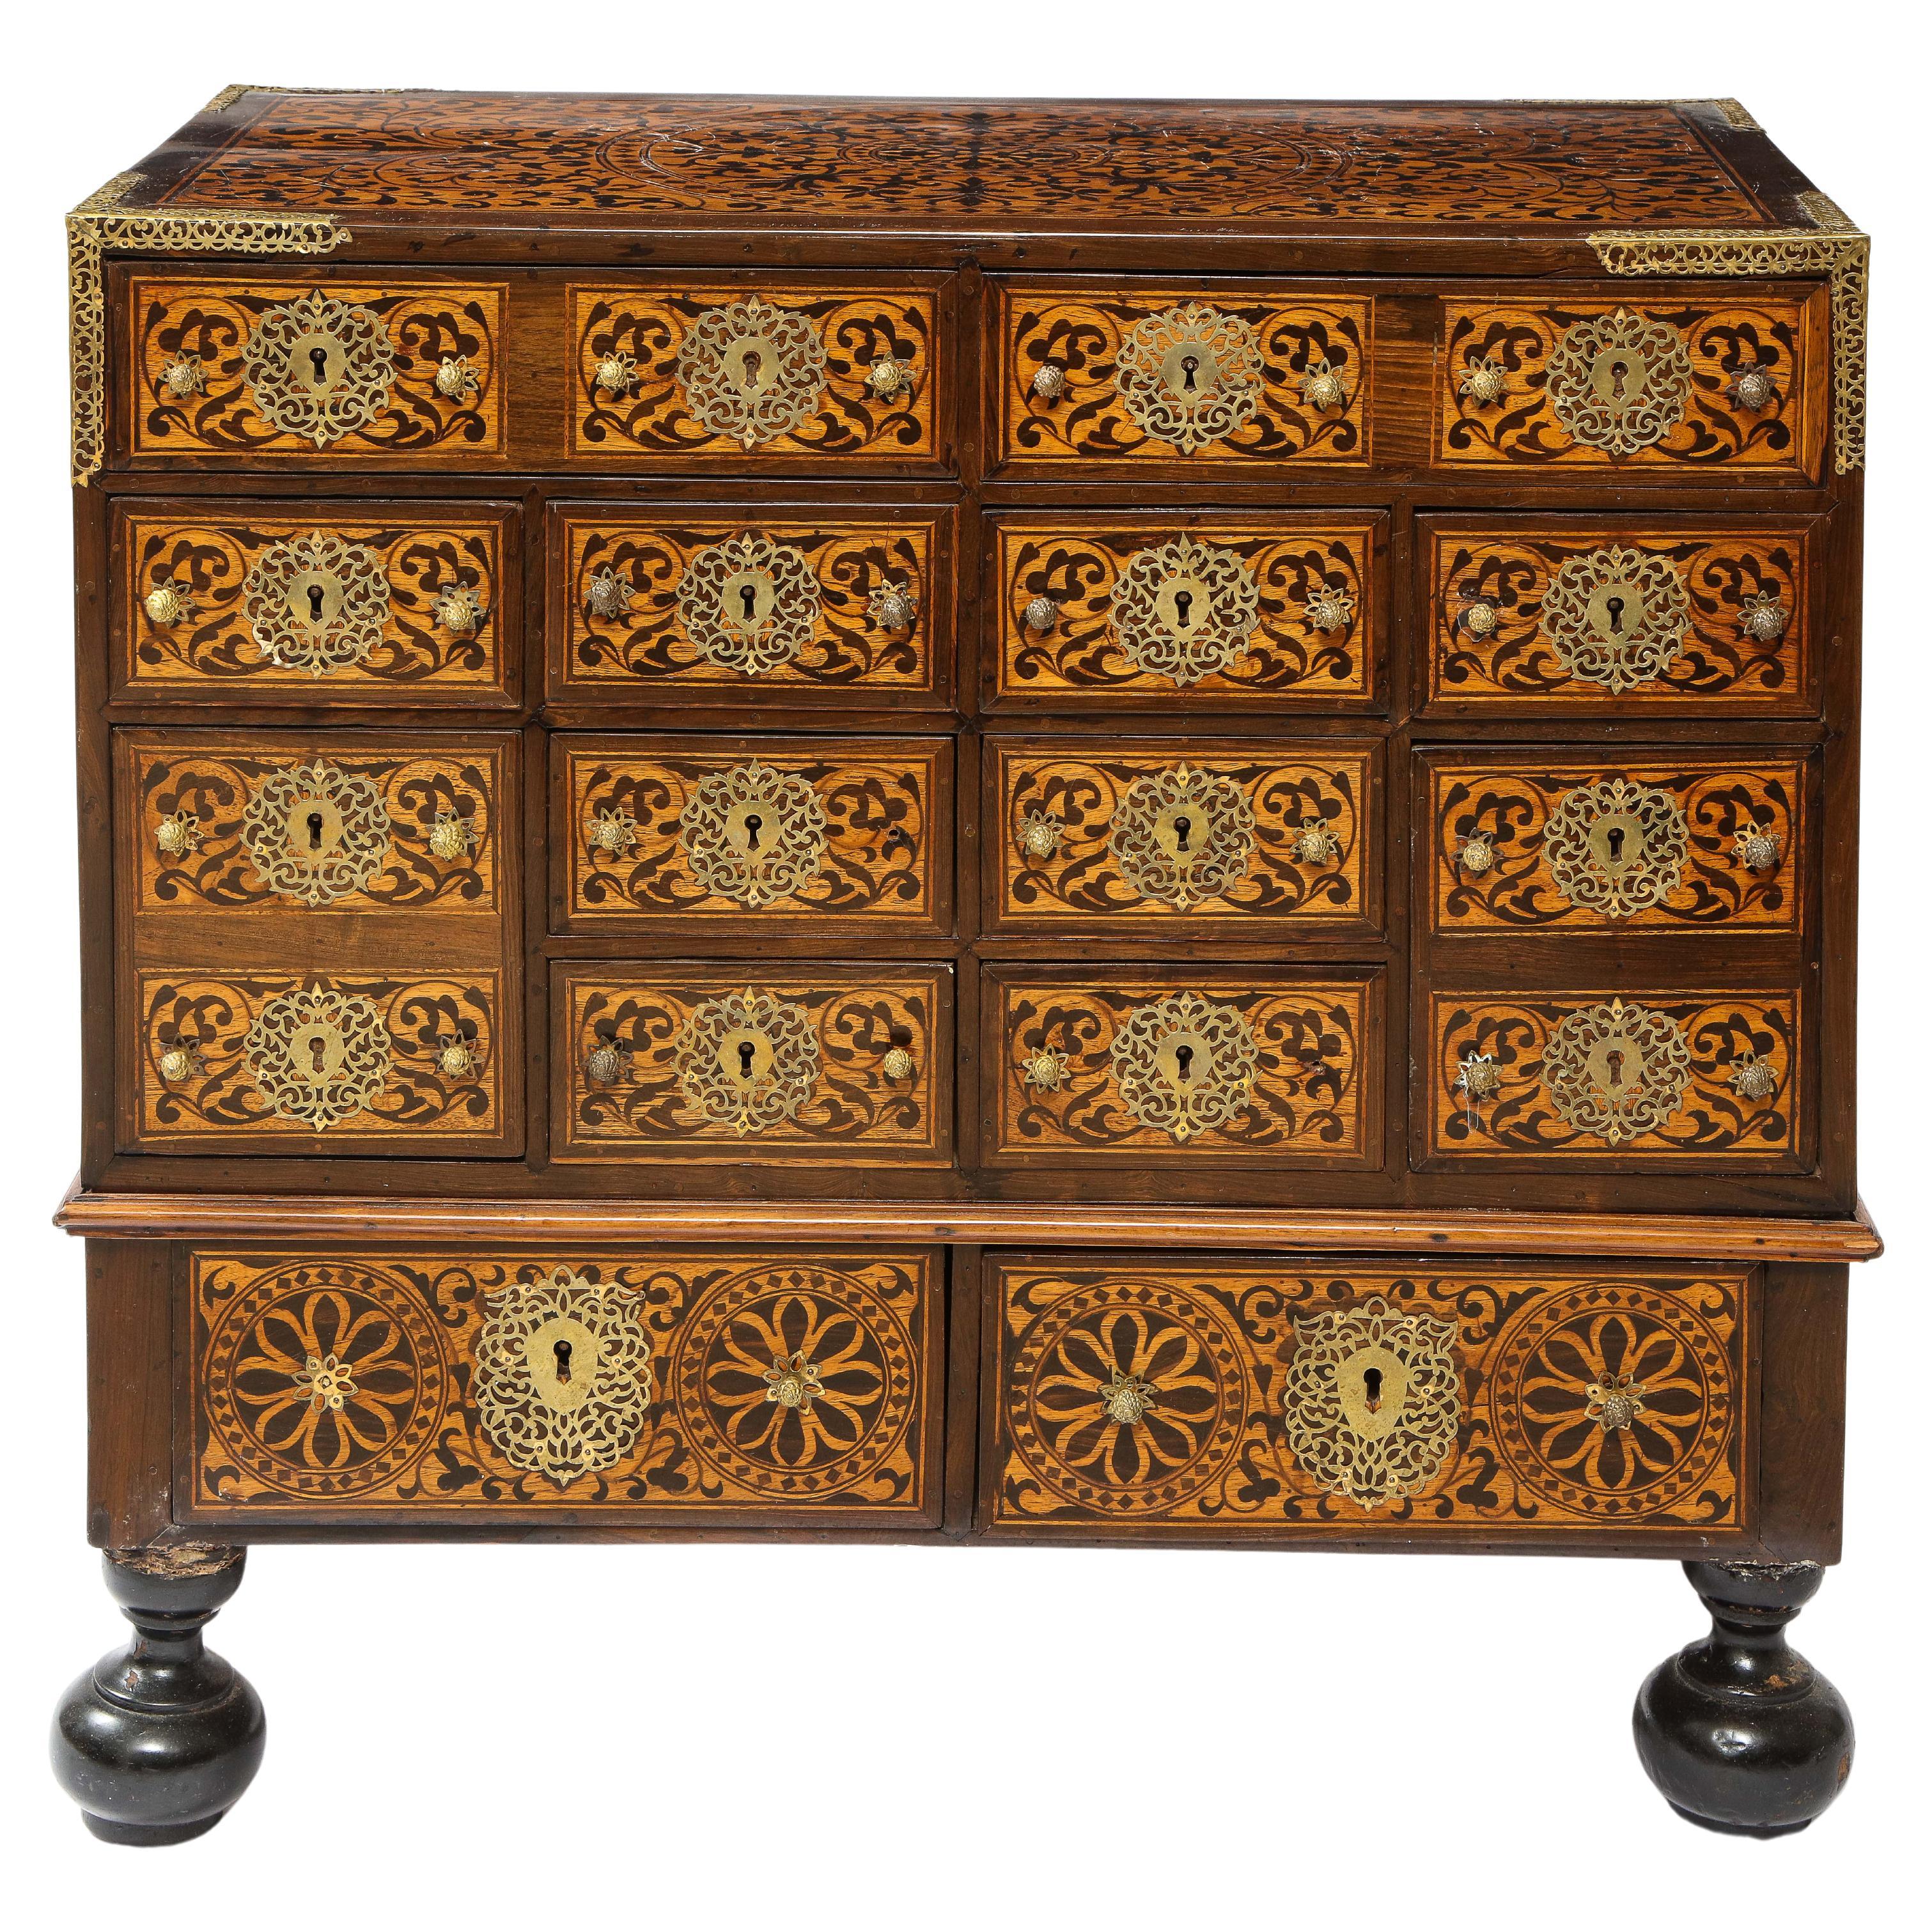 An Indo- Portuguese brass-mounted hardwood and Indian Wood marquetry cabinet, Goa. Gorgeously made with hand-cut hardwood and the finest quality of other Indian veneered wood in two separate parts. Fitted with twelve drawers and resting on bun feet.